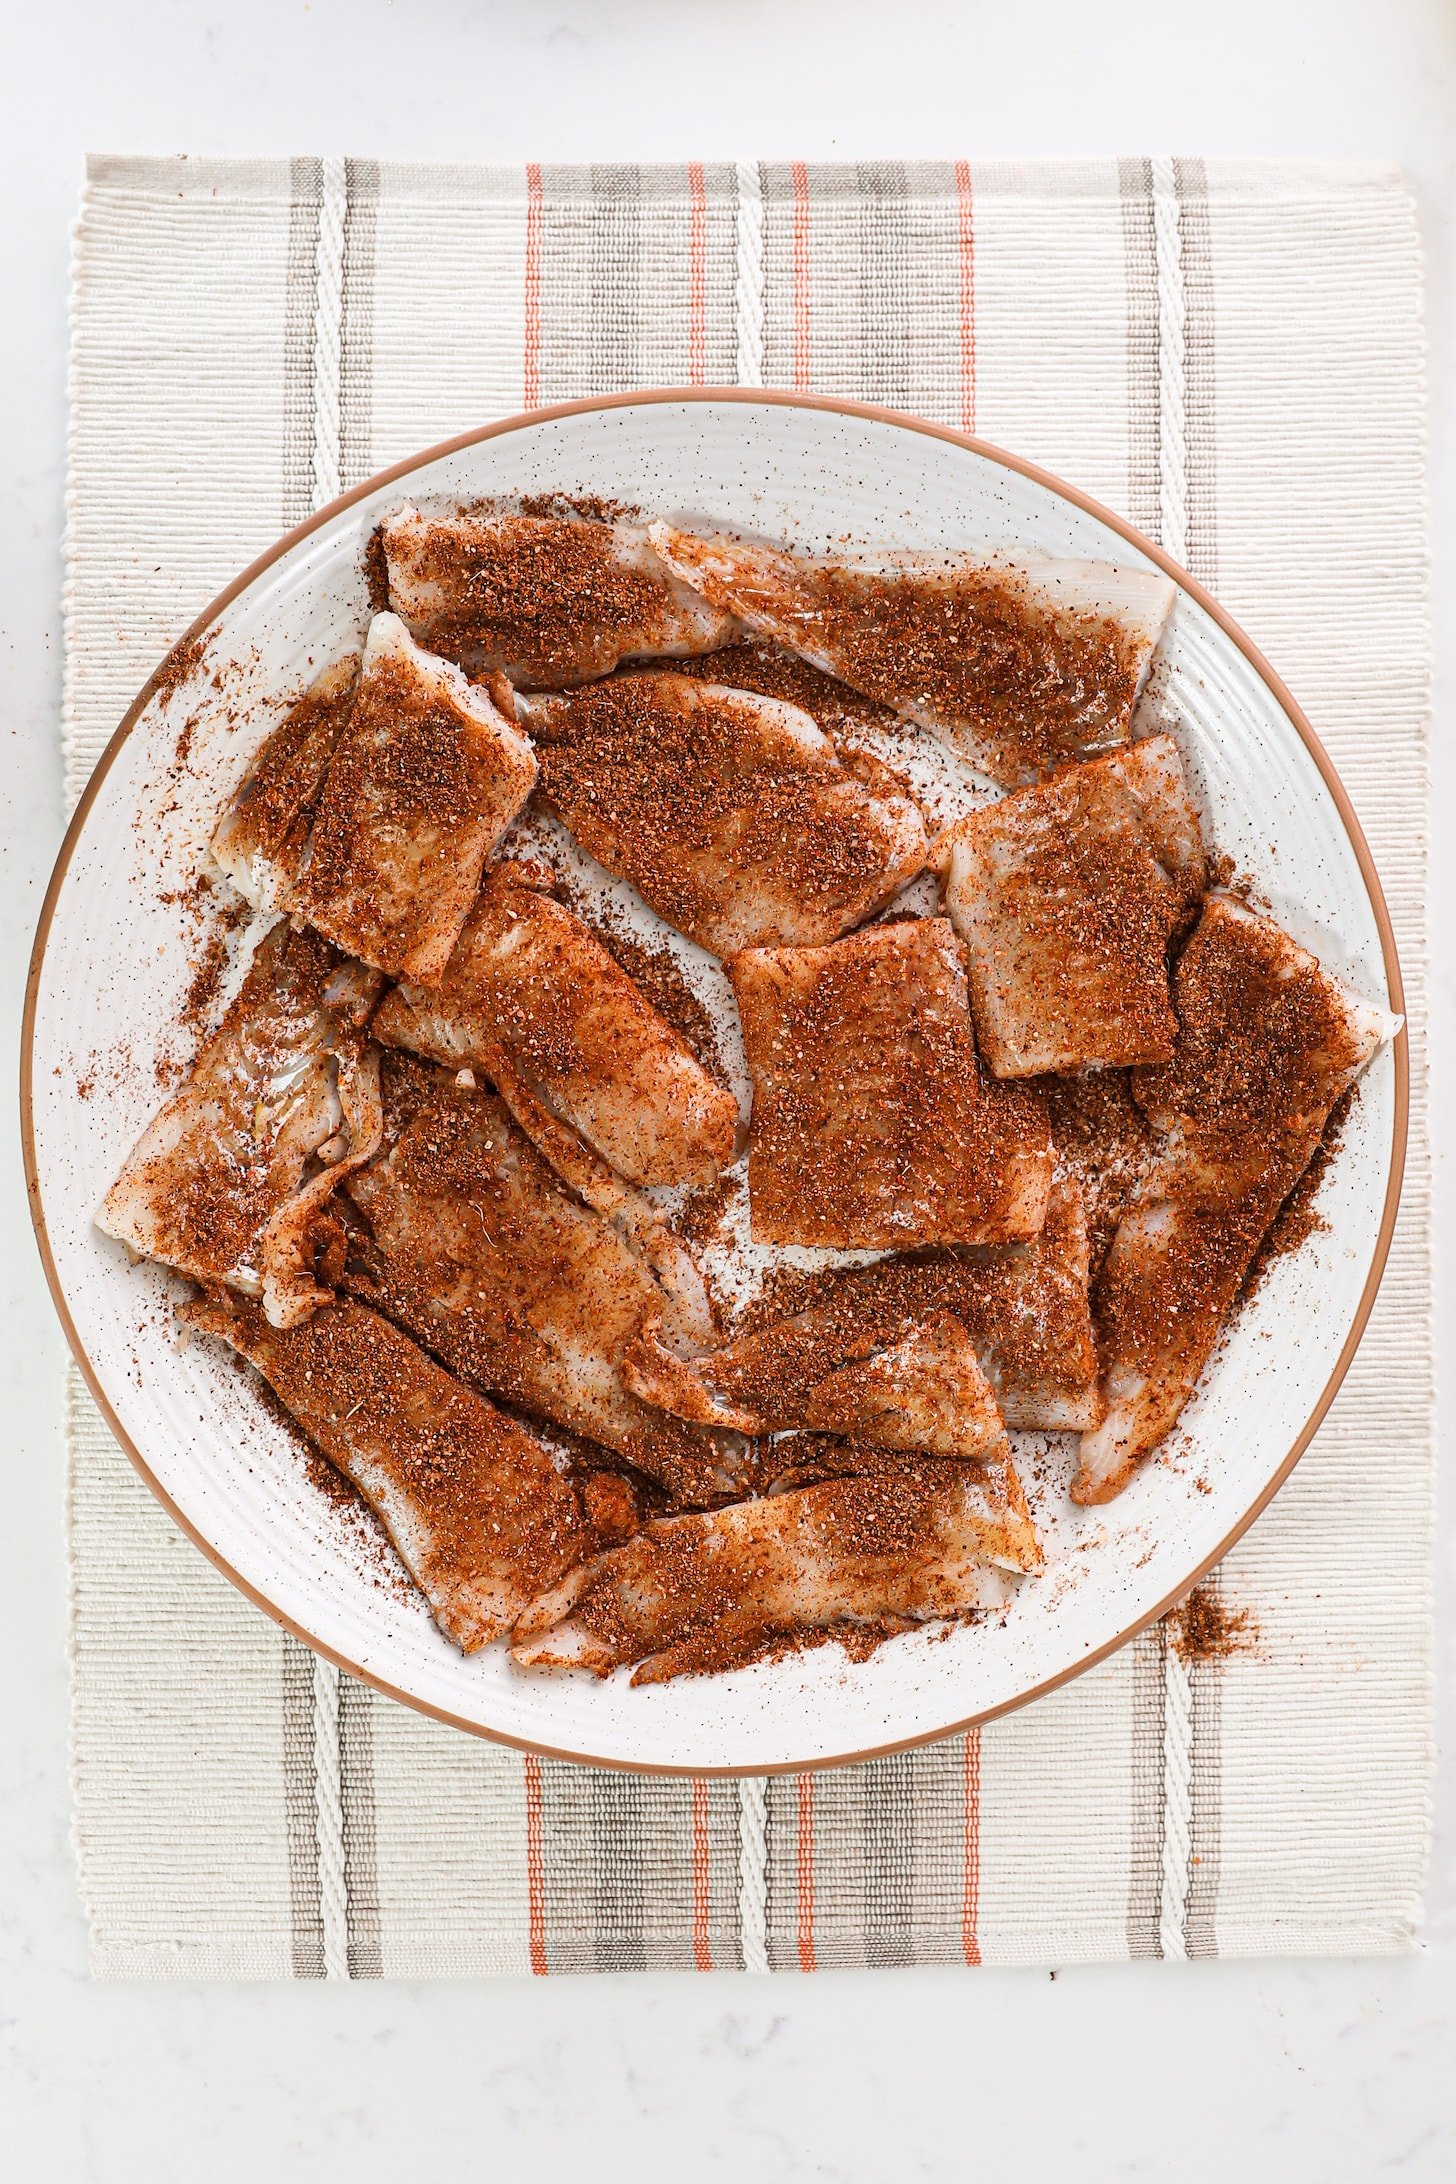 a plate of fish fillets coated in red spices arranged in a single layer.